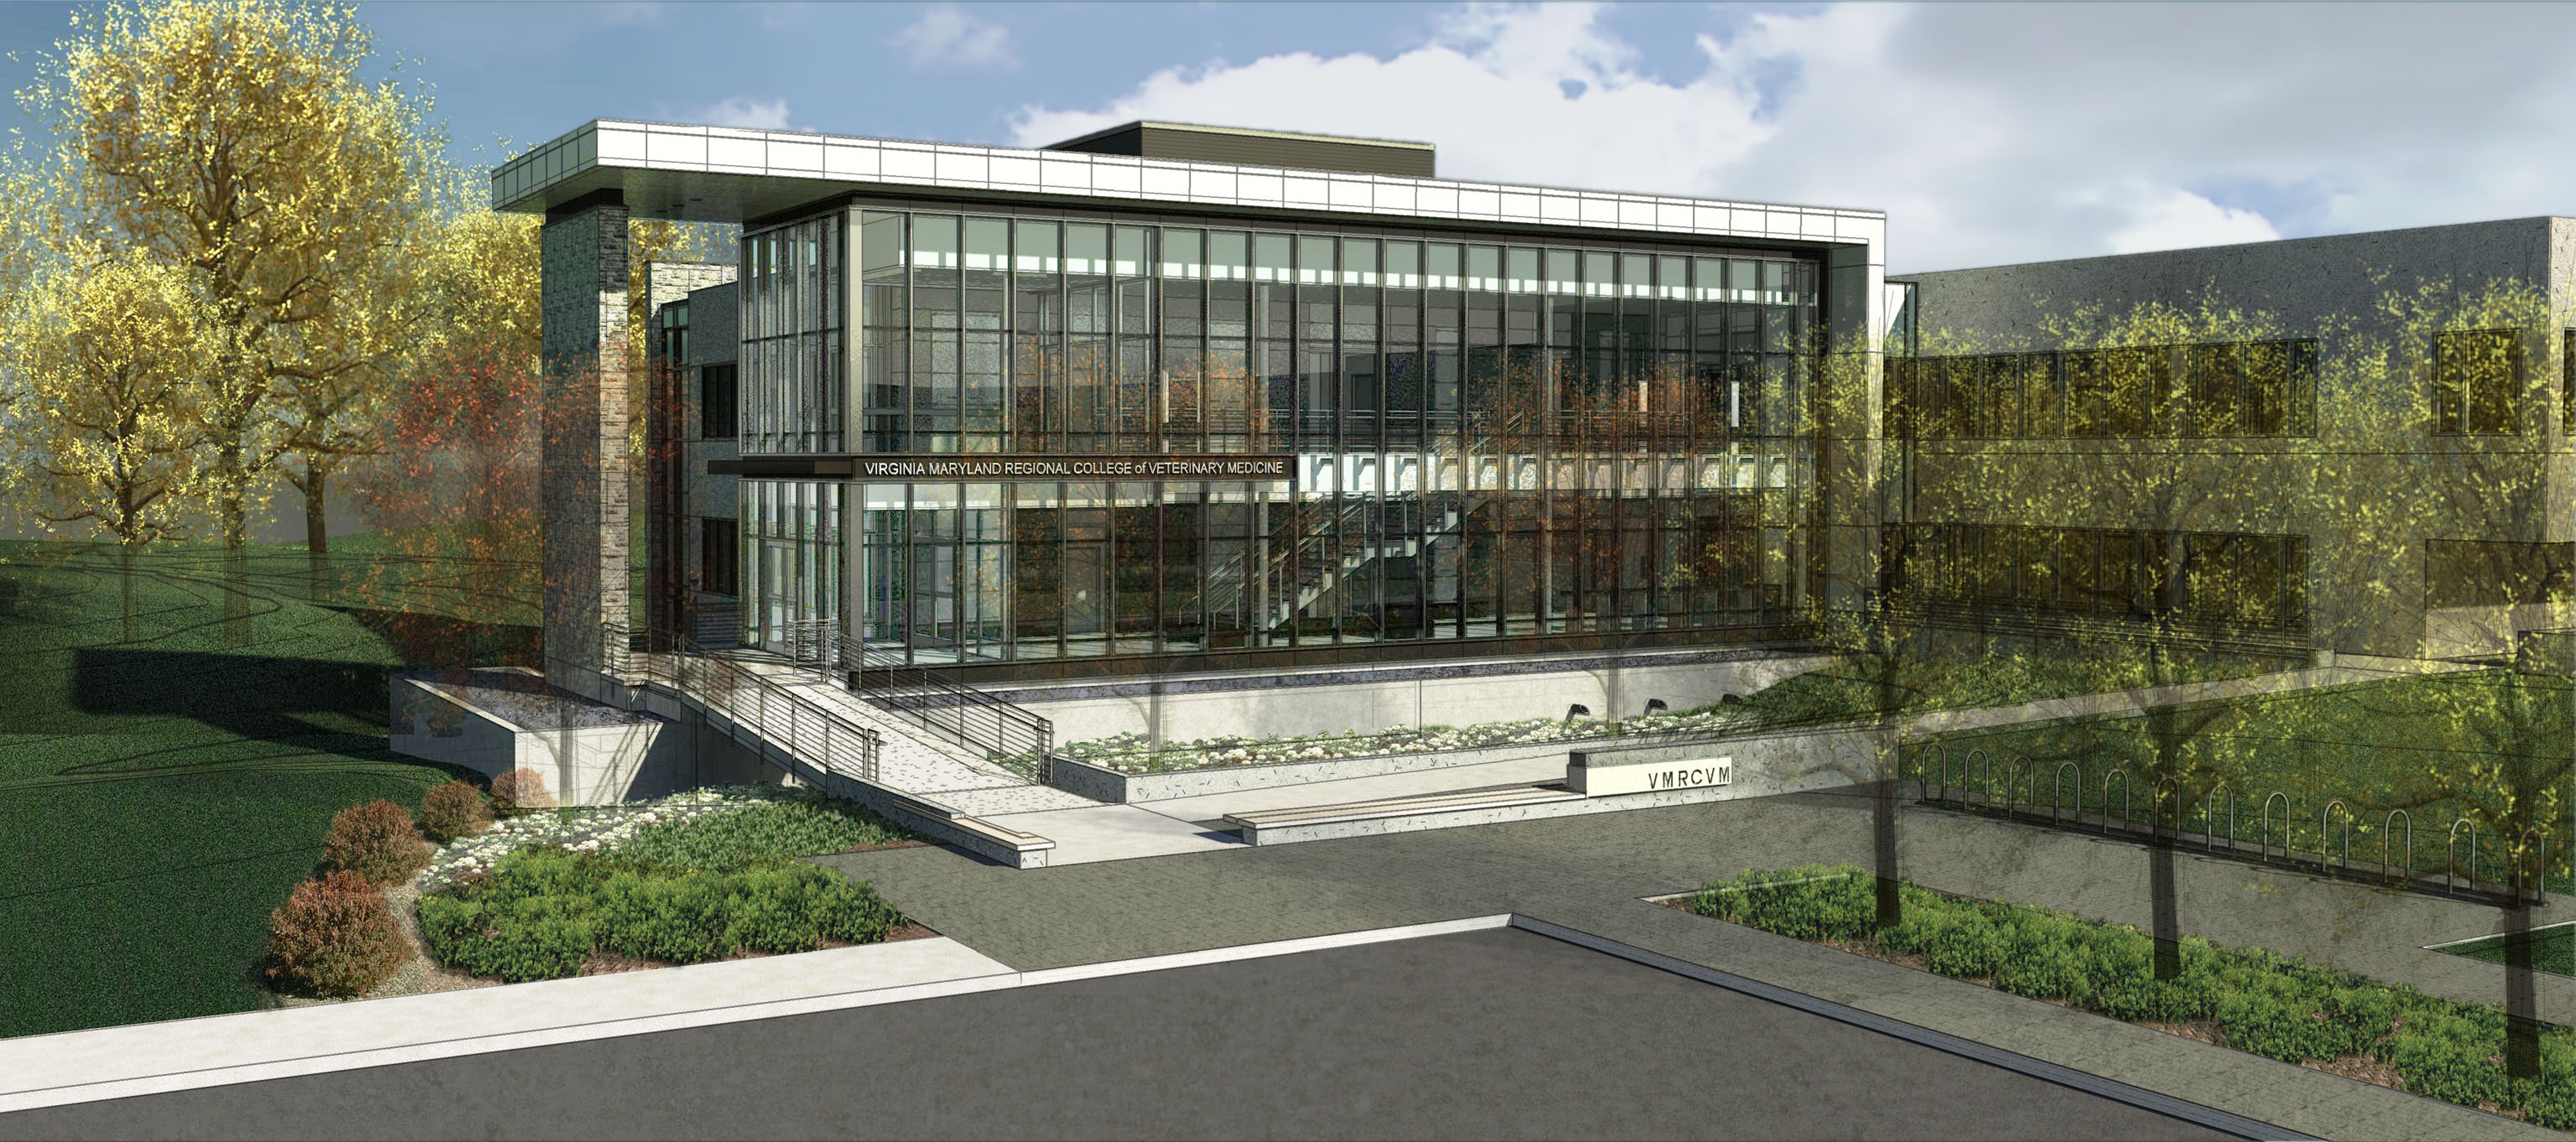 The Veterinary Medicine Instruction Addition, as depicted in this rendering, is the second major addition under way on the veterinary college's Virginia Tech campus.